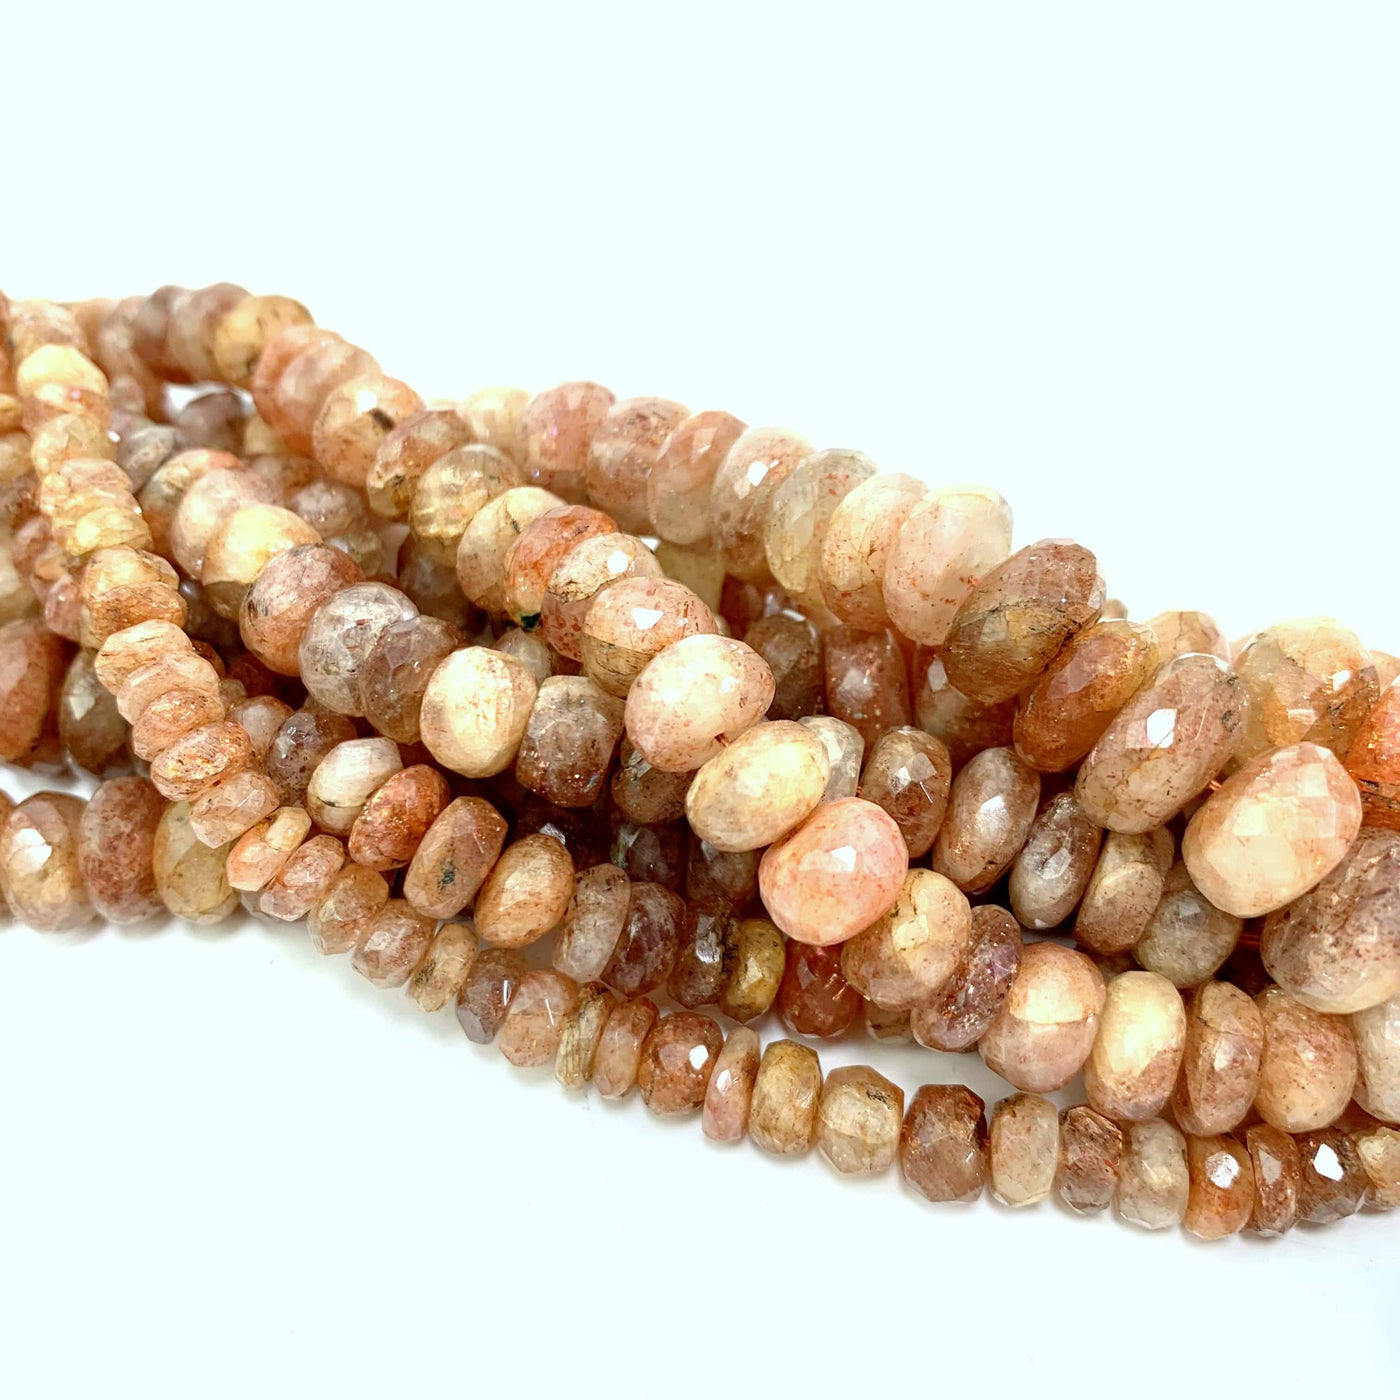 all 3 variations of sunstone faceted beads twisted together on a white background